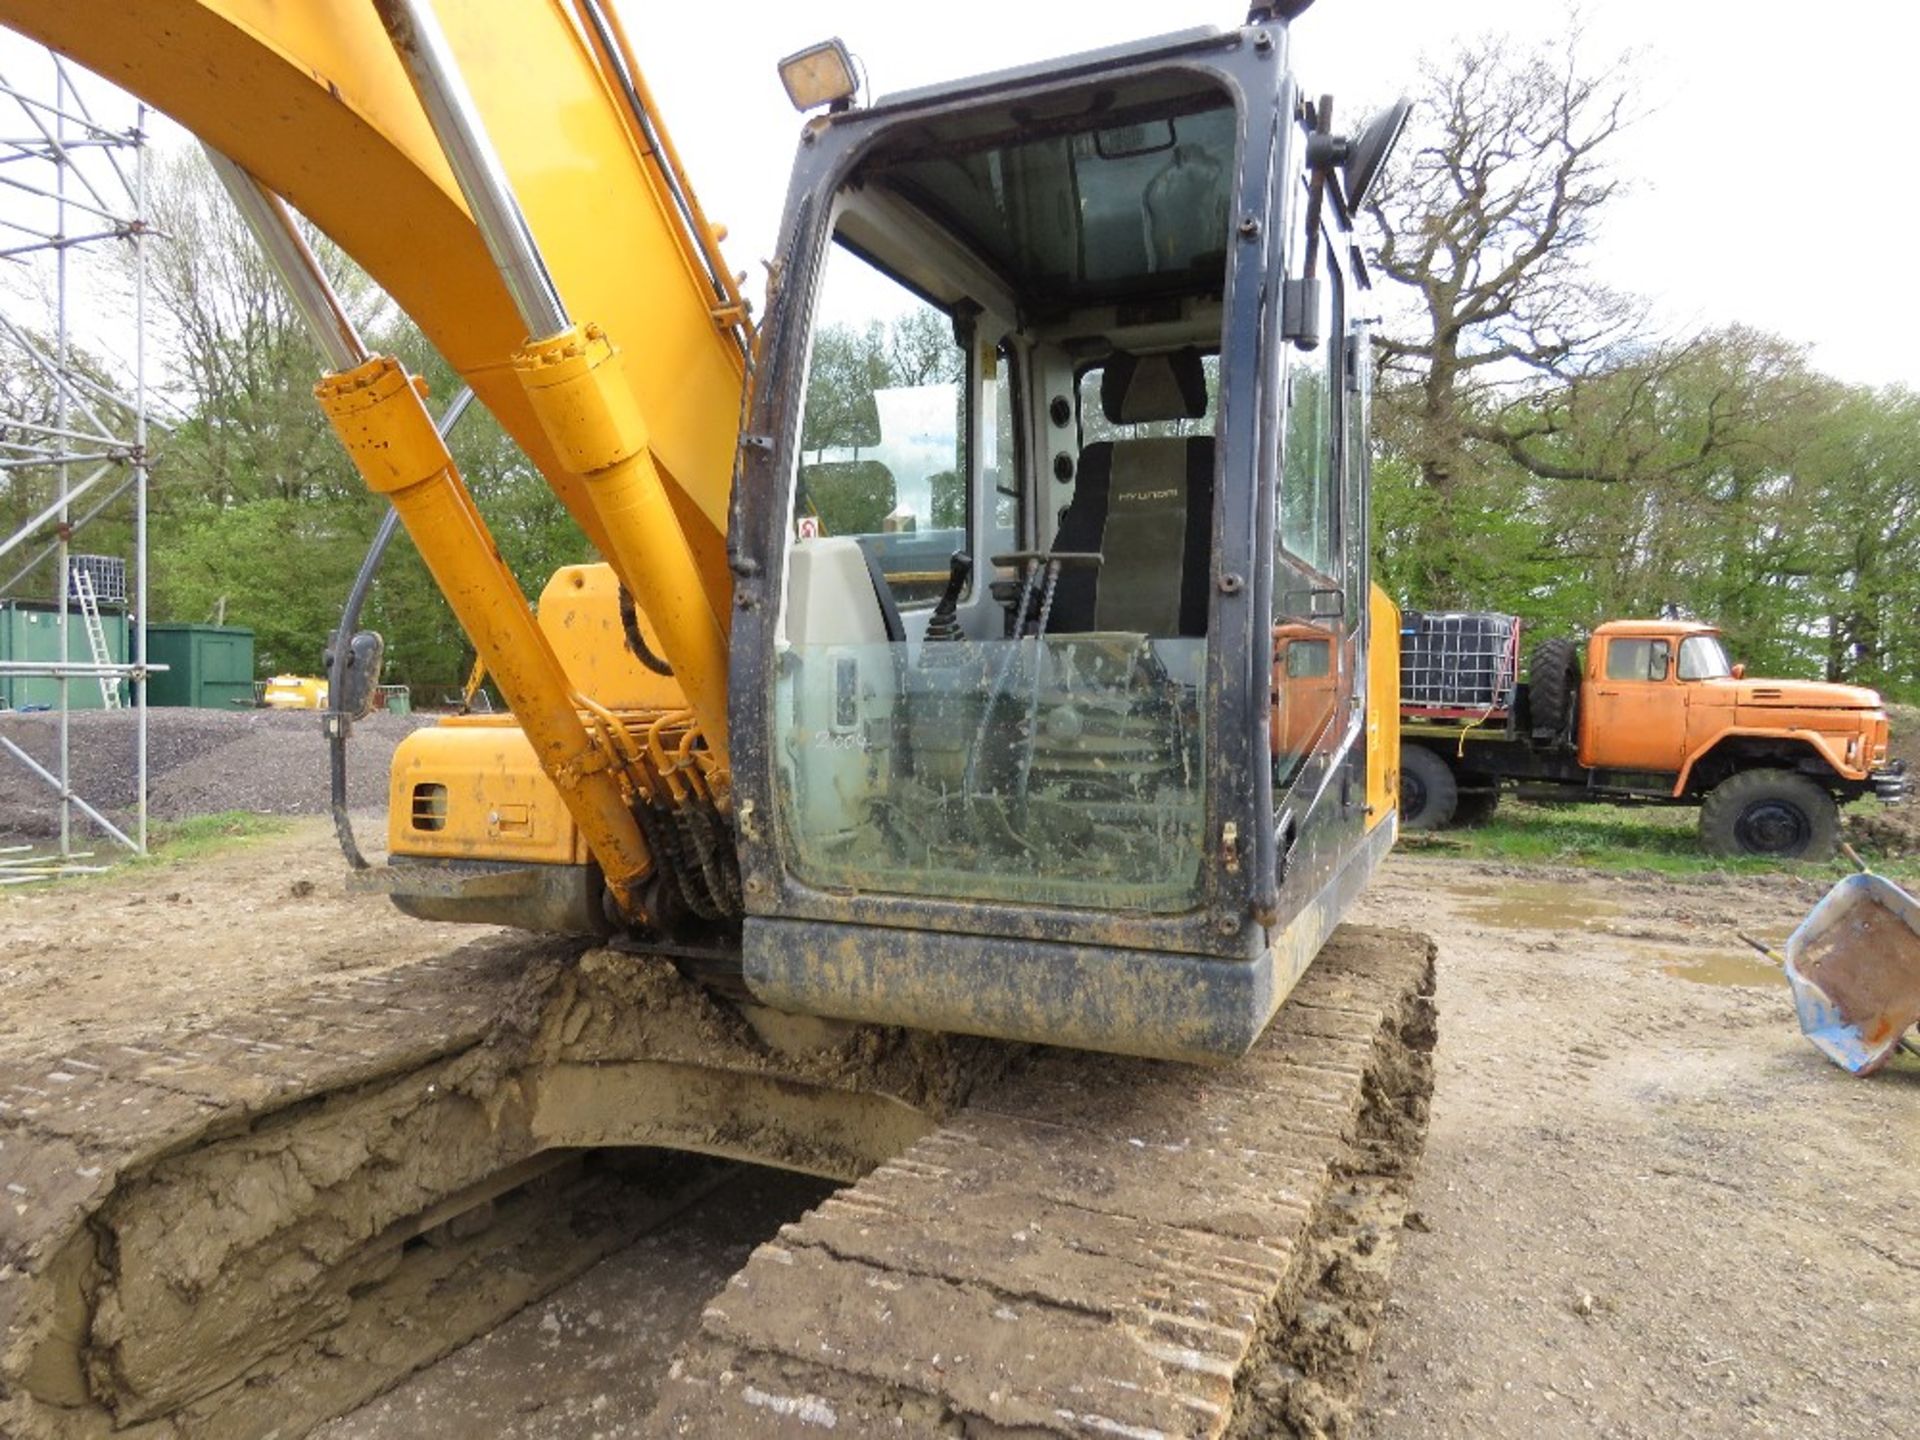 HYUNDAI 140LC-7A STEEL TRACKED EXCAVATOR, BELIEVED TO BE YEAR 2009 APPROX. HOUR CLOCK READING 868 RE - Image 5 of 25